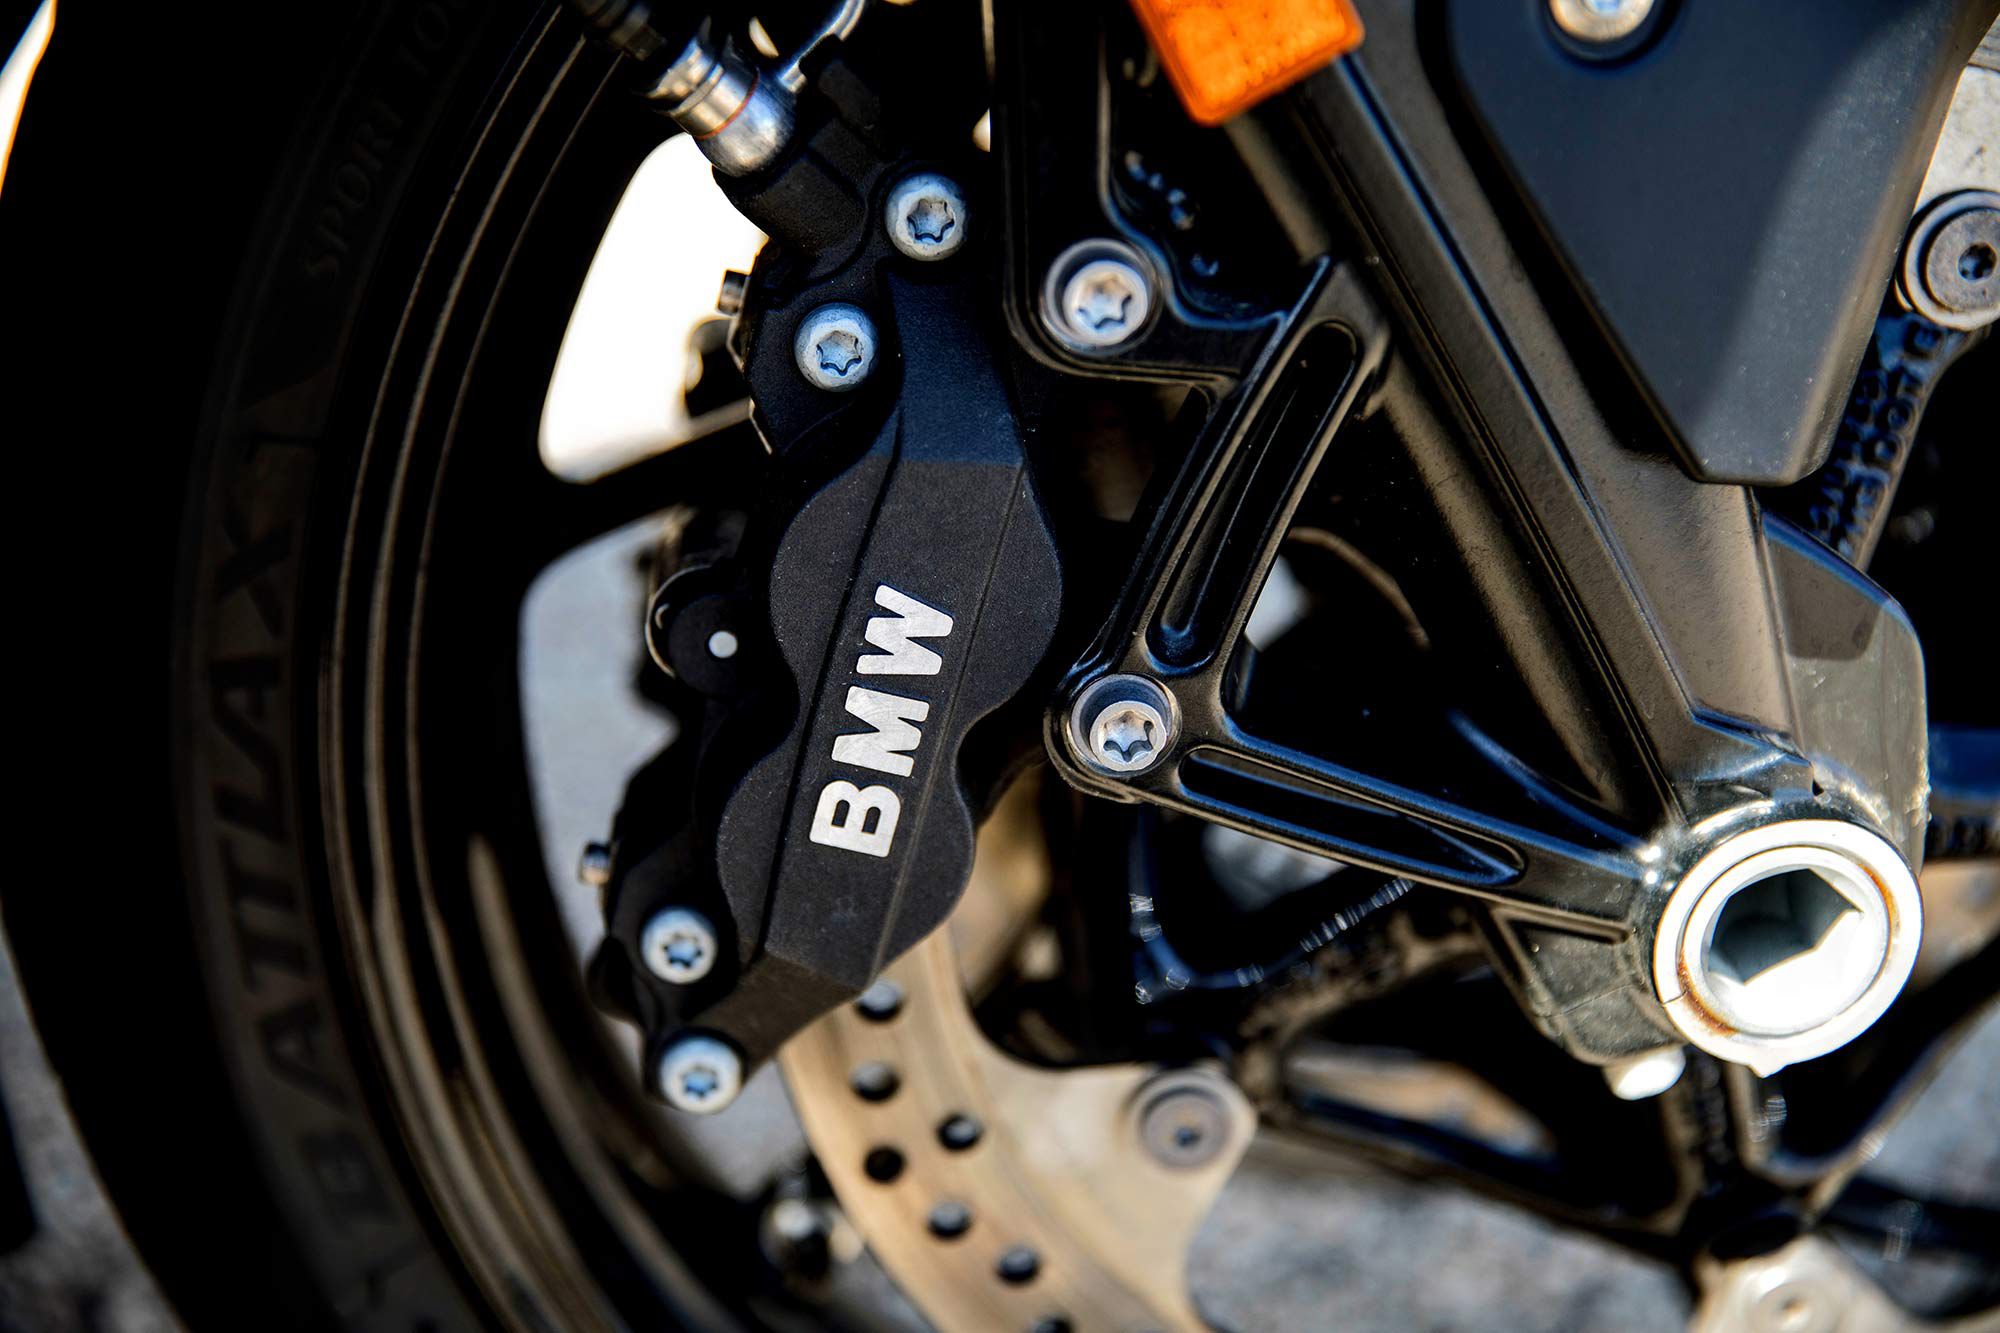 Eight calipers (total) plus ABS Pro will stop anything, anywhere.